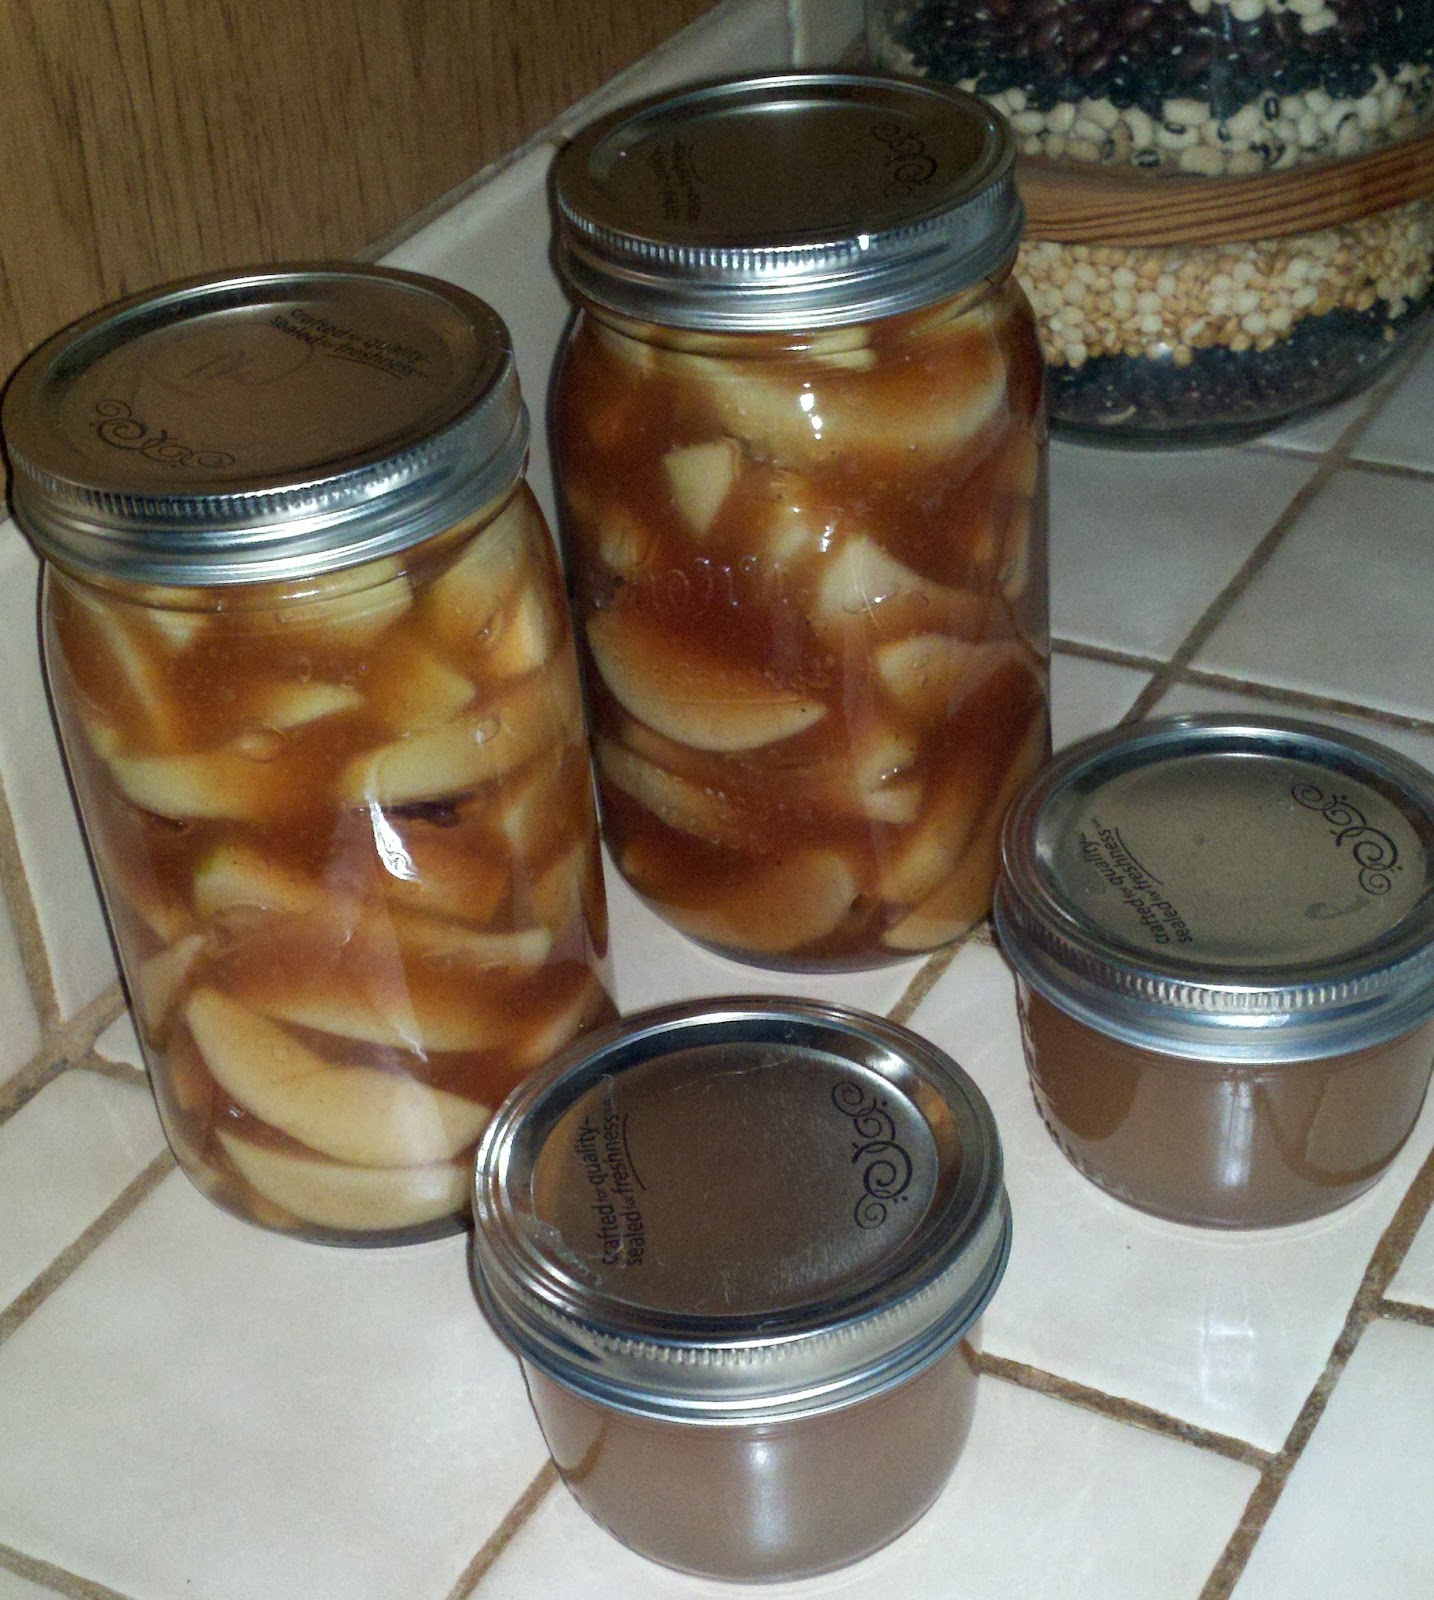 Apple Pie filling and Apple Jelly (from the cores and peels of the apples)